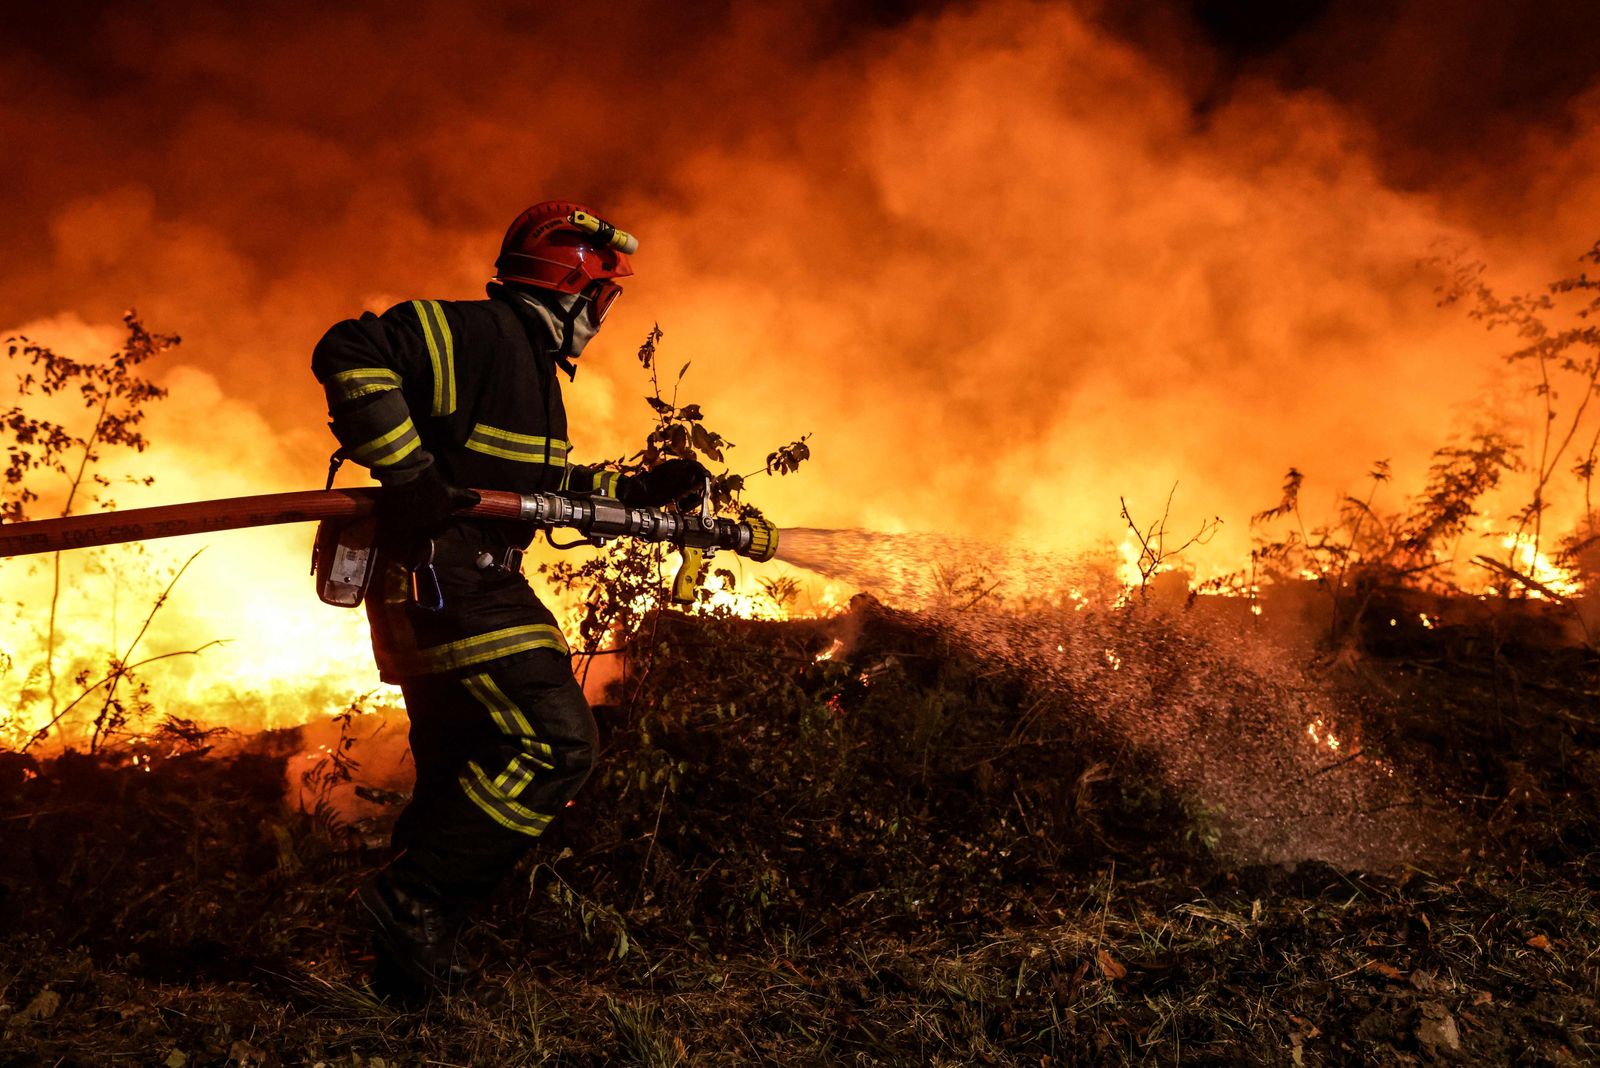 A firefighter supported by tactical firefighters (unseen) set controlled fires to burn a plot of land as they attempt to prevent the wild fire from spreading due to wind change, as they fight a forest fire near Louchats in Gironde, southwestern France on July 17, 2022. - France was on high alert on July 18, 2022, as the peak of a punishing heatwave gripped the country, while wildfires raging in parts of southwest Europe showed no sign of abating. In the southwestern Gironde region, firefighters over the weekend continued to fight to control forest blazes that have devoured nearly 11,000 hectares (27,000 acres) since July 12. (Photo by THIBAUD MORITZ / AFP) - AFP